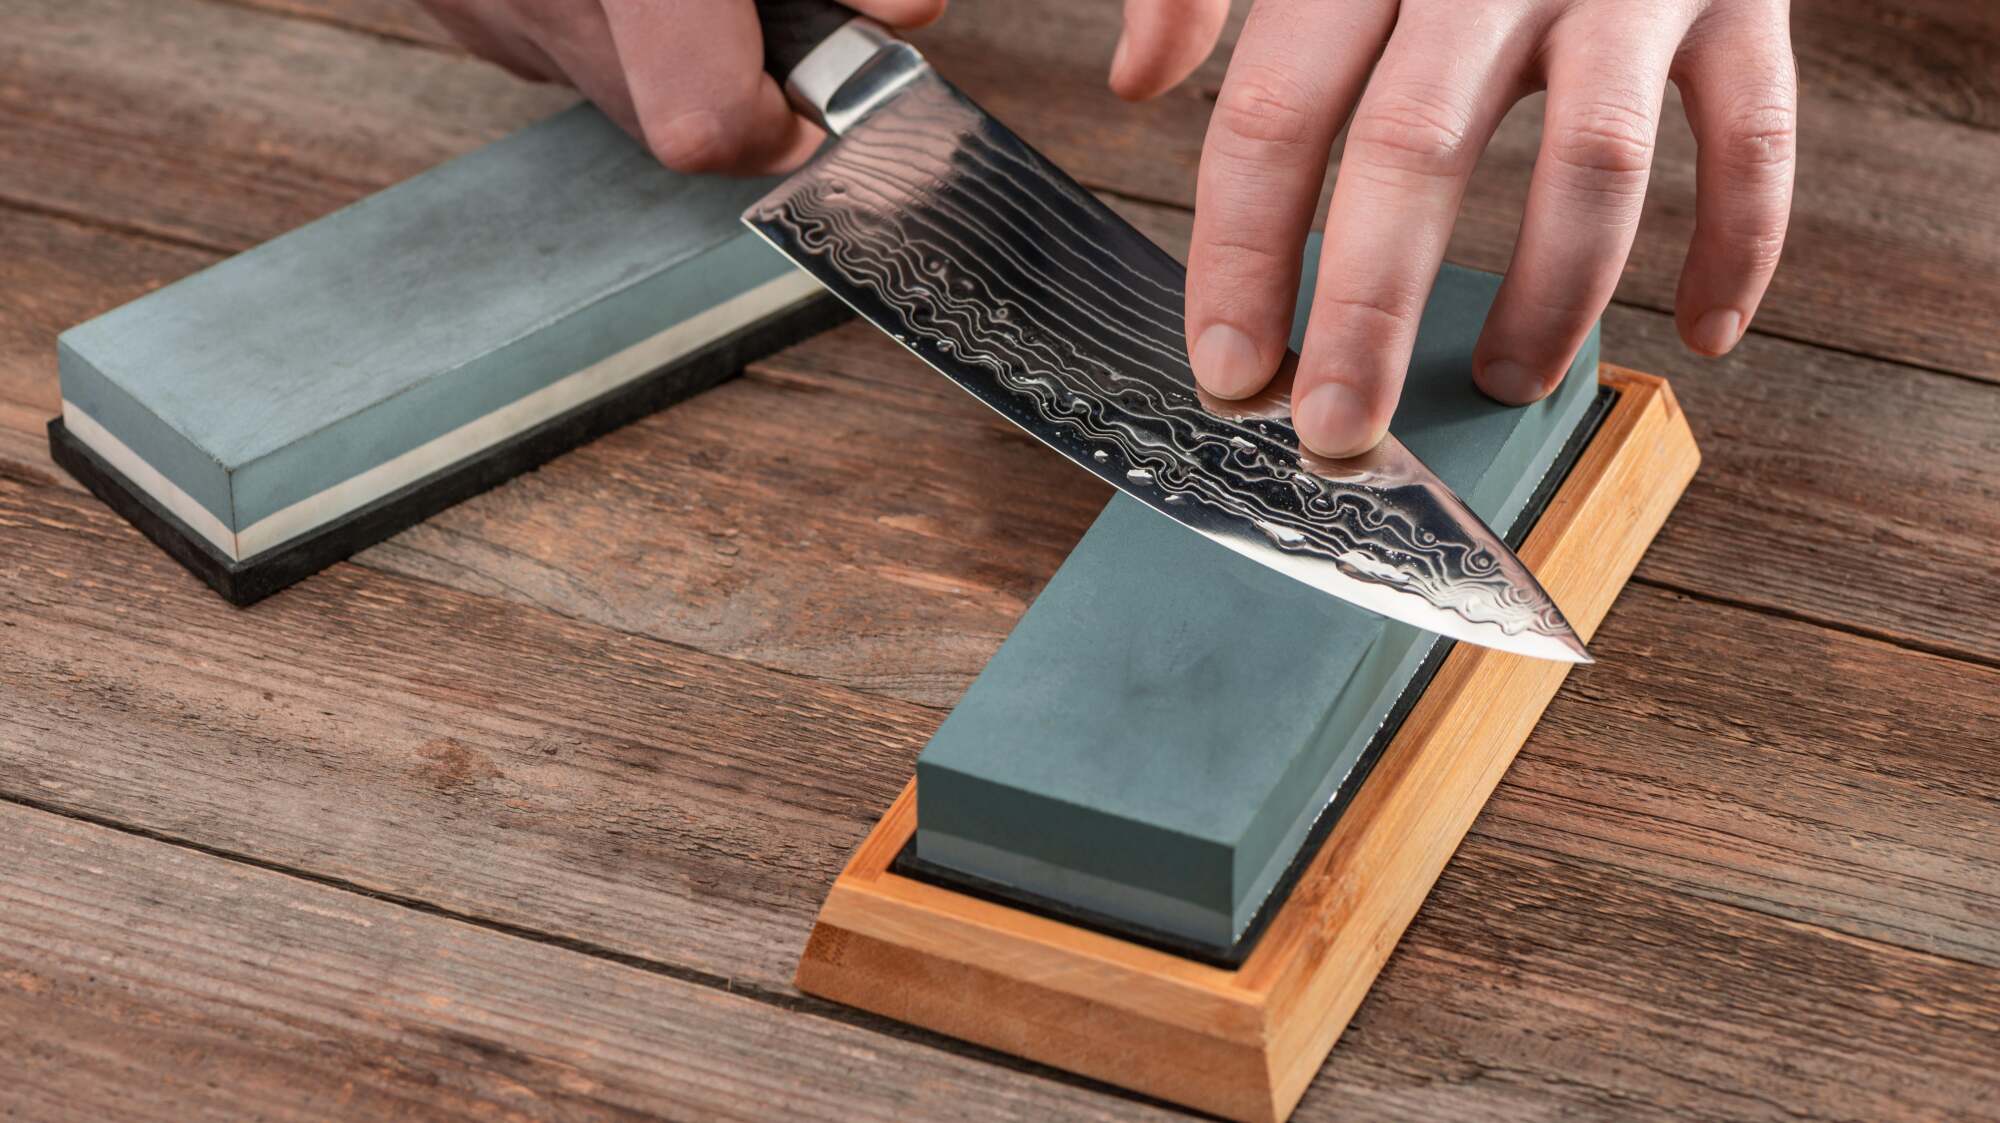 A person sharpening a knife on a whetstone.